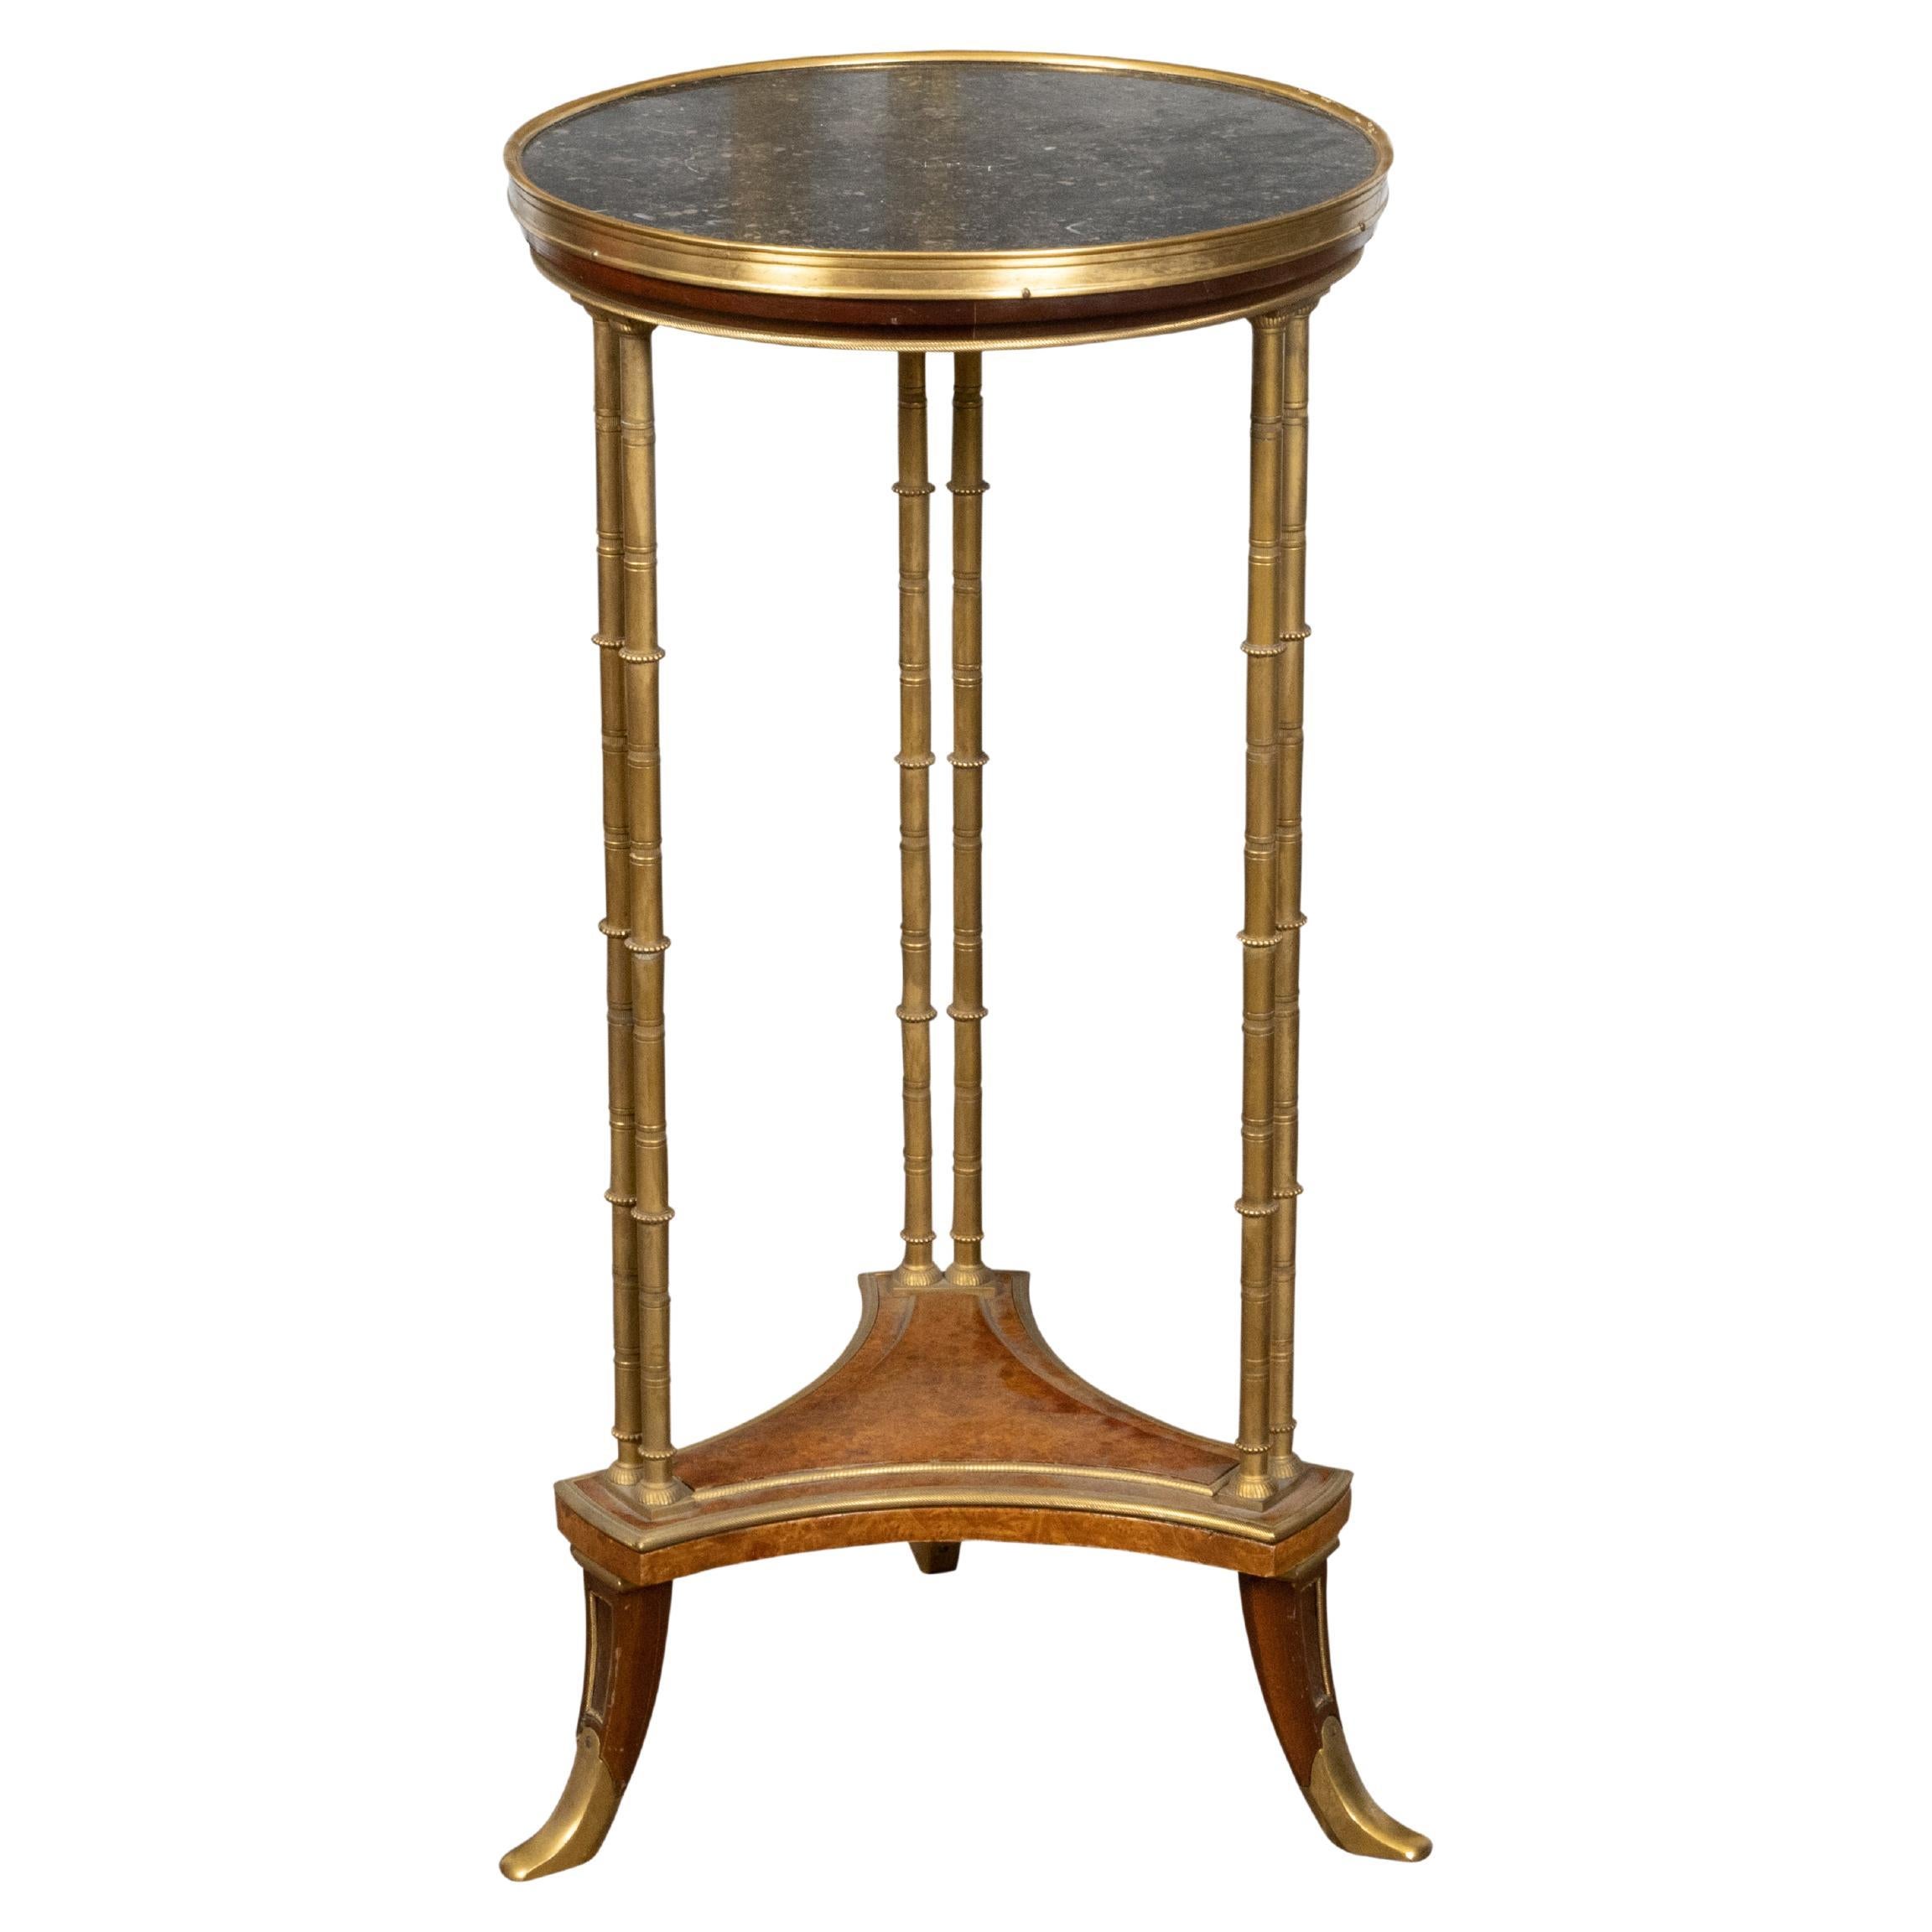 French 19th Century Bronze Guéridon Table with Black Marble Top and Burl Shelf